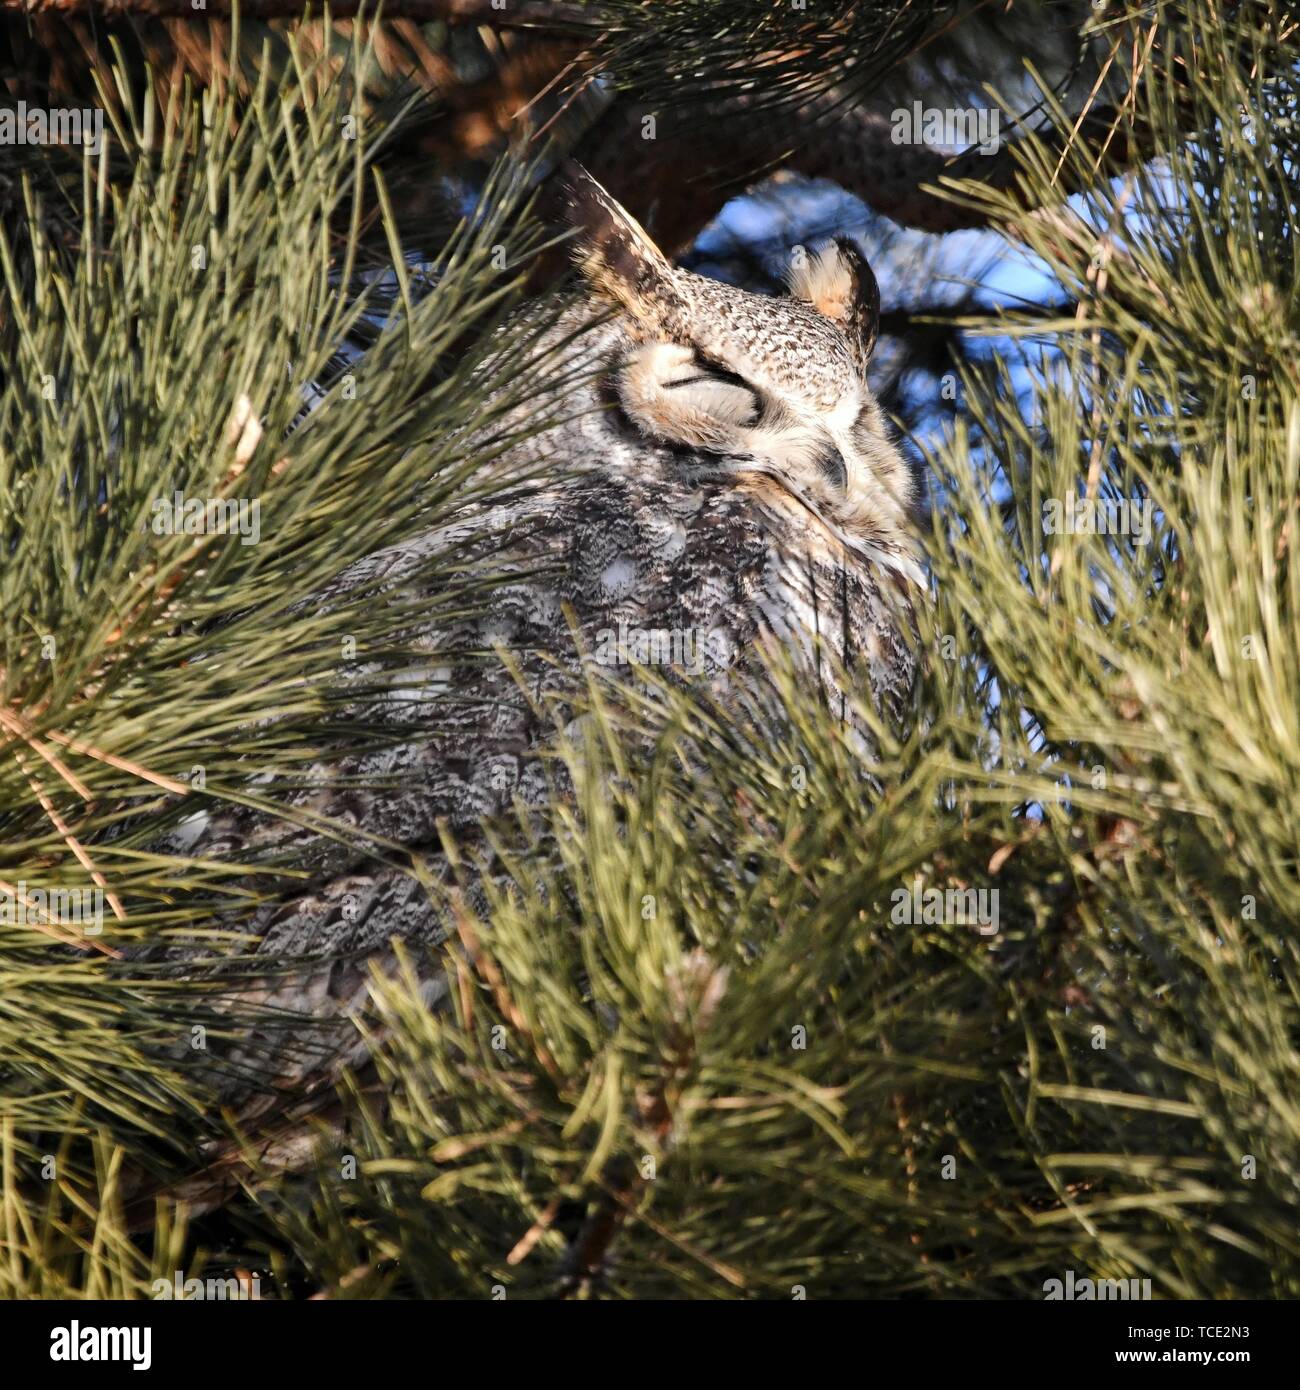 Close-up portrait of a great horned owl in a pine tree, Colorado, United States Stock Photo